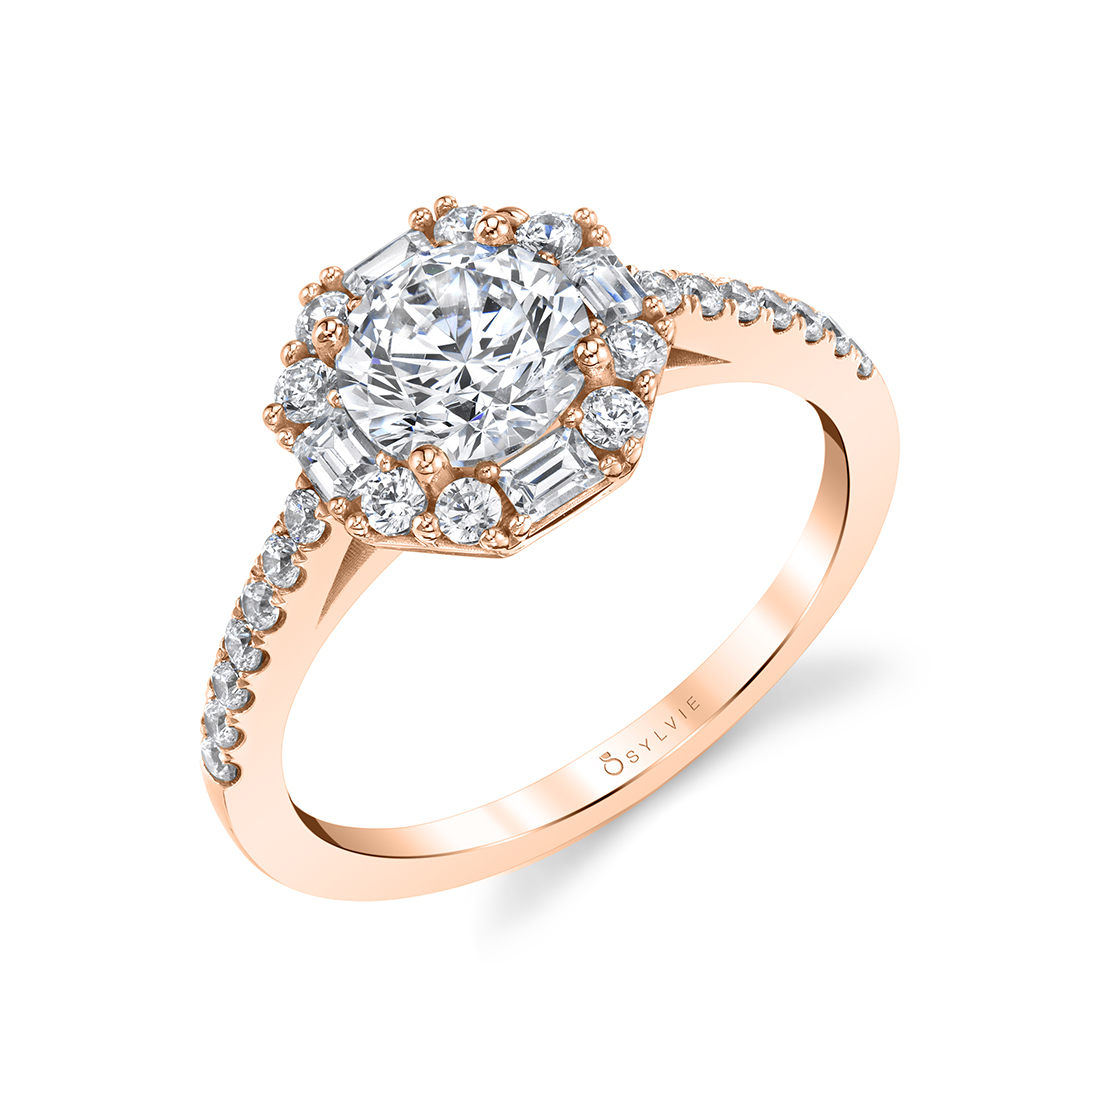 Baguette Halo Engagement Ring in Rose Gold